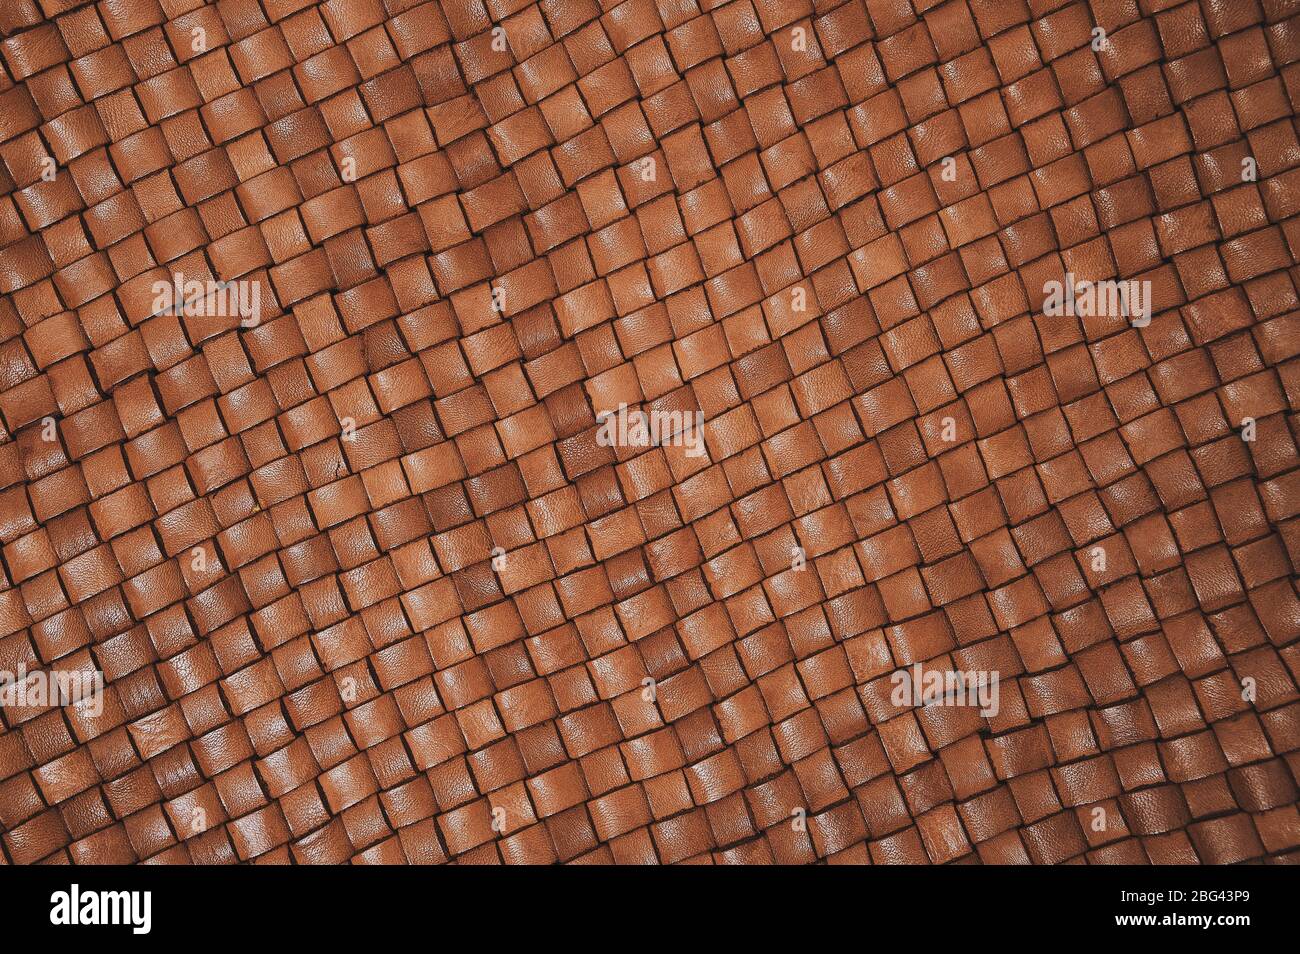 Vintage brown braided leather texture. Leather woven together. Abstract  clothing background. Natural material. Diagonal lines. Stock Photo